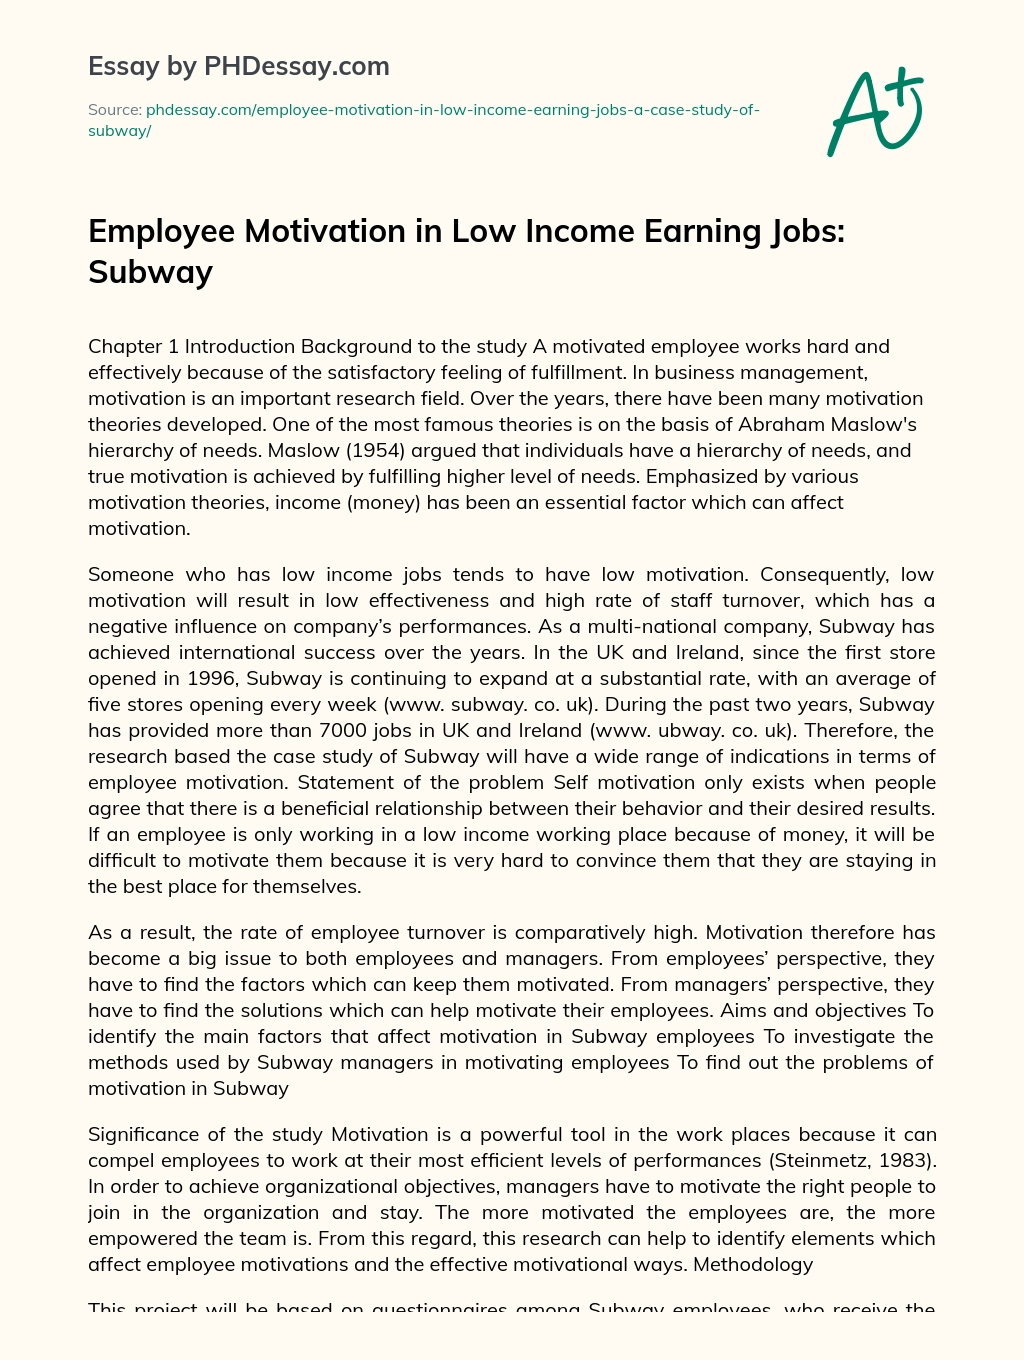 Employee Motivation in Low Income Earning Jobs:  Subway essay